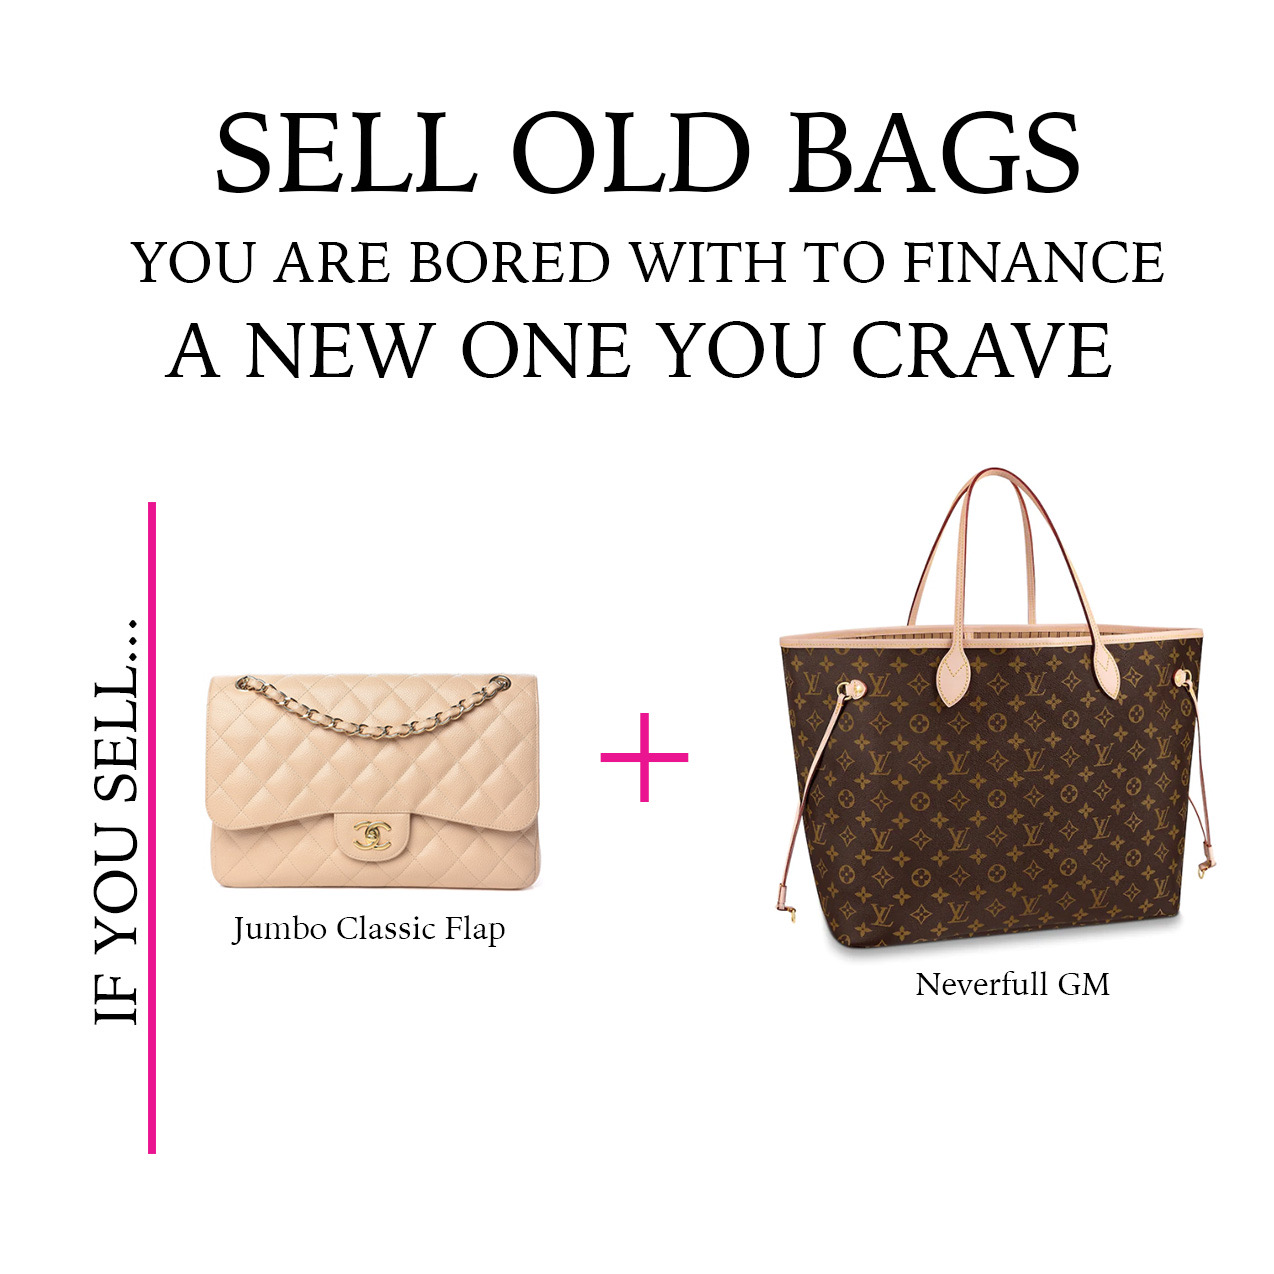 Take PurseBop's Chanel 101 class to learn about brand history and